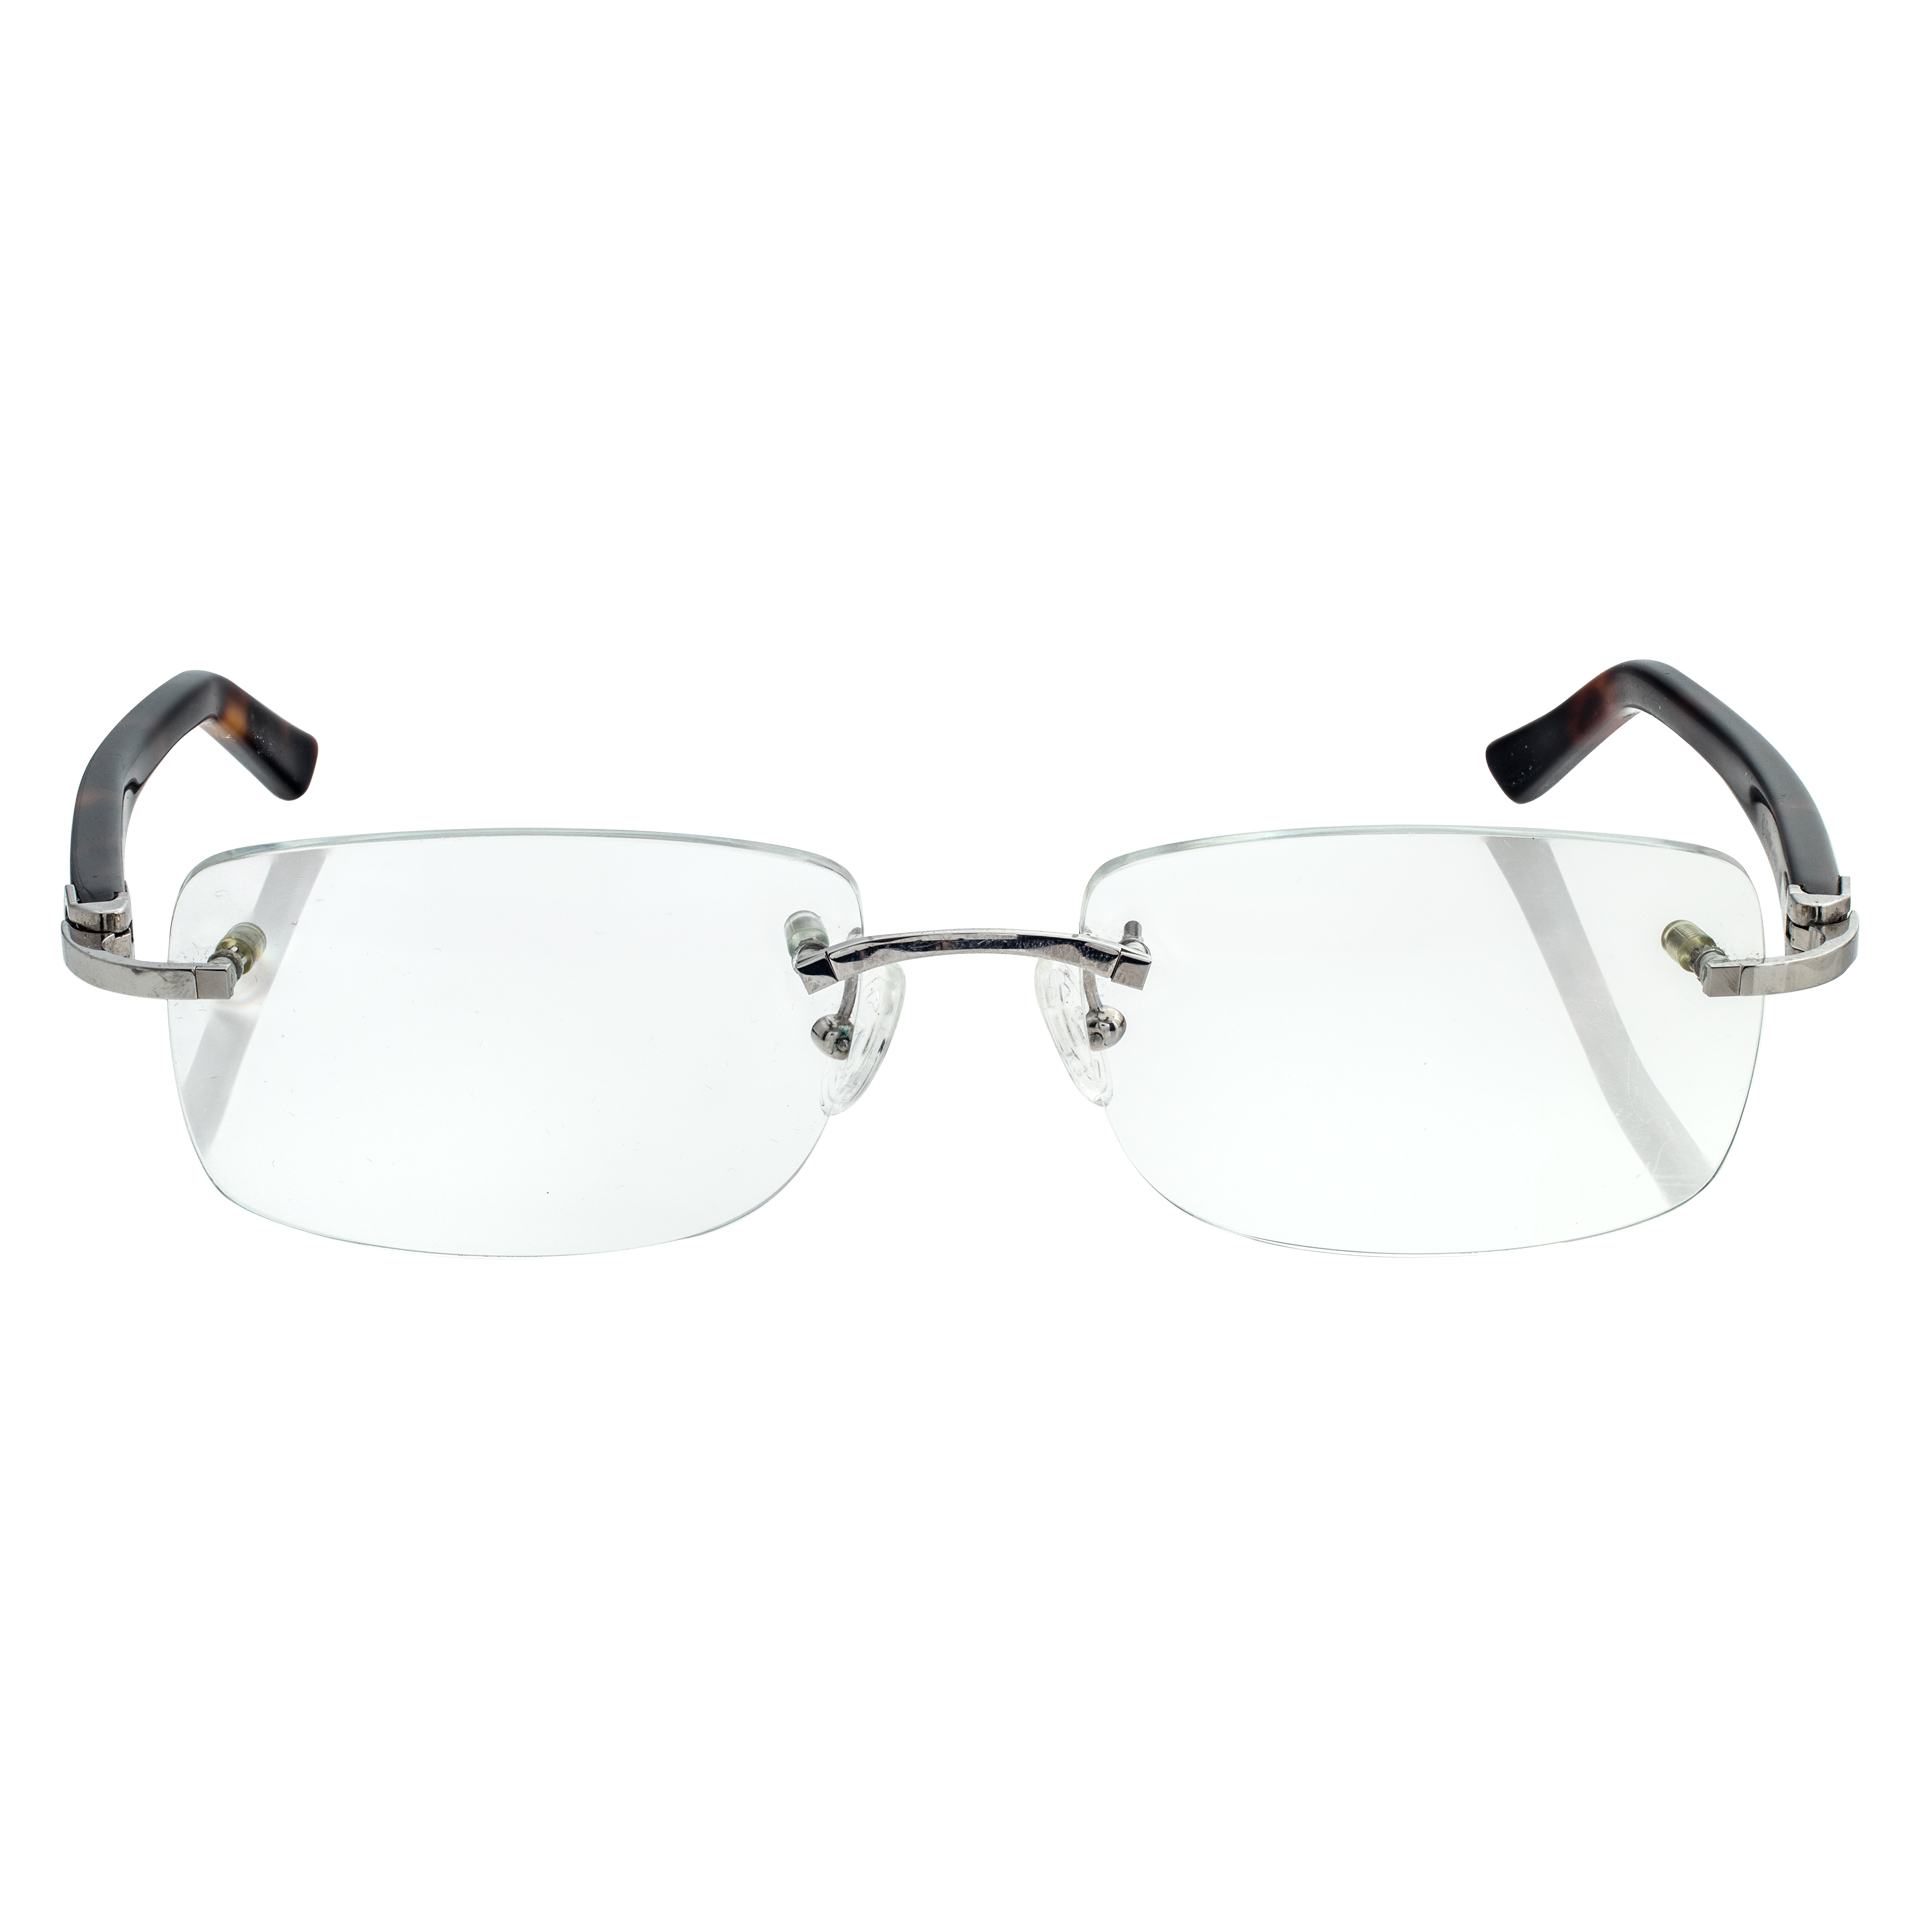 Cartier rimless eyeglasses with tortoise shell temples image 1